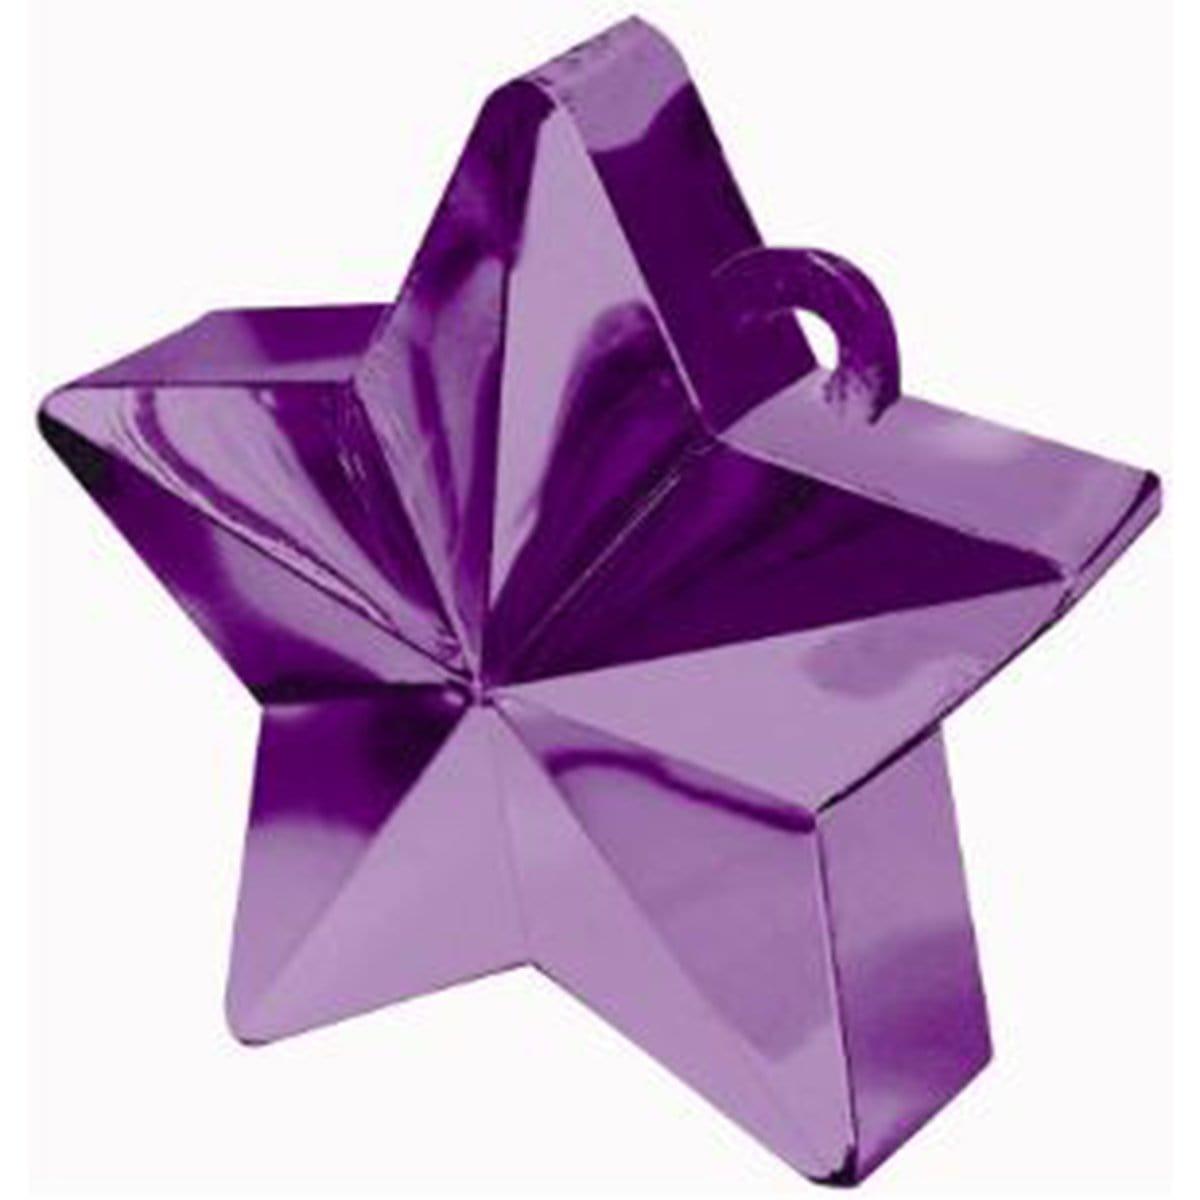 Buy Balloons Purple Star Balloon Weight sold at Party Expert